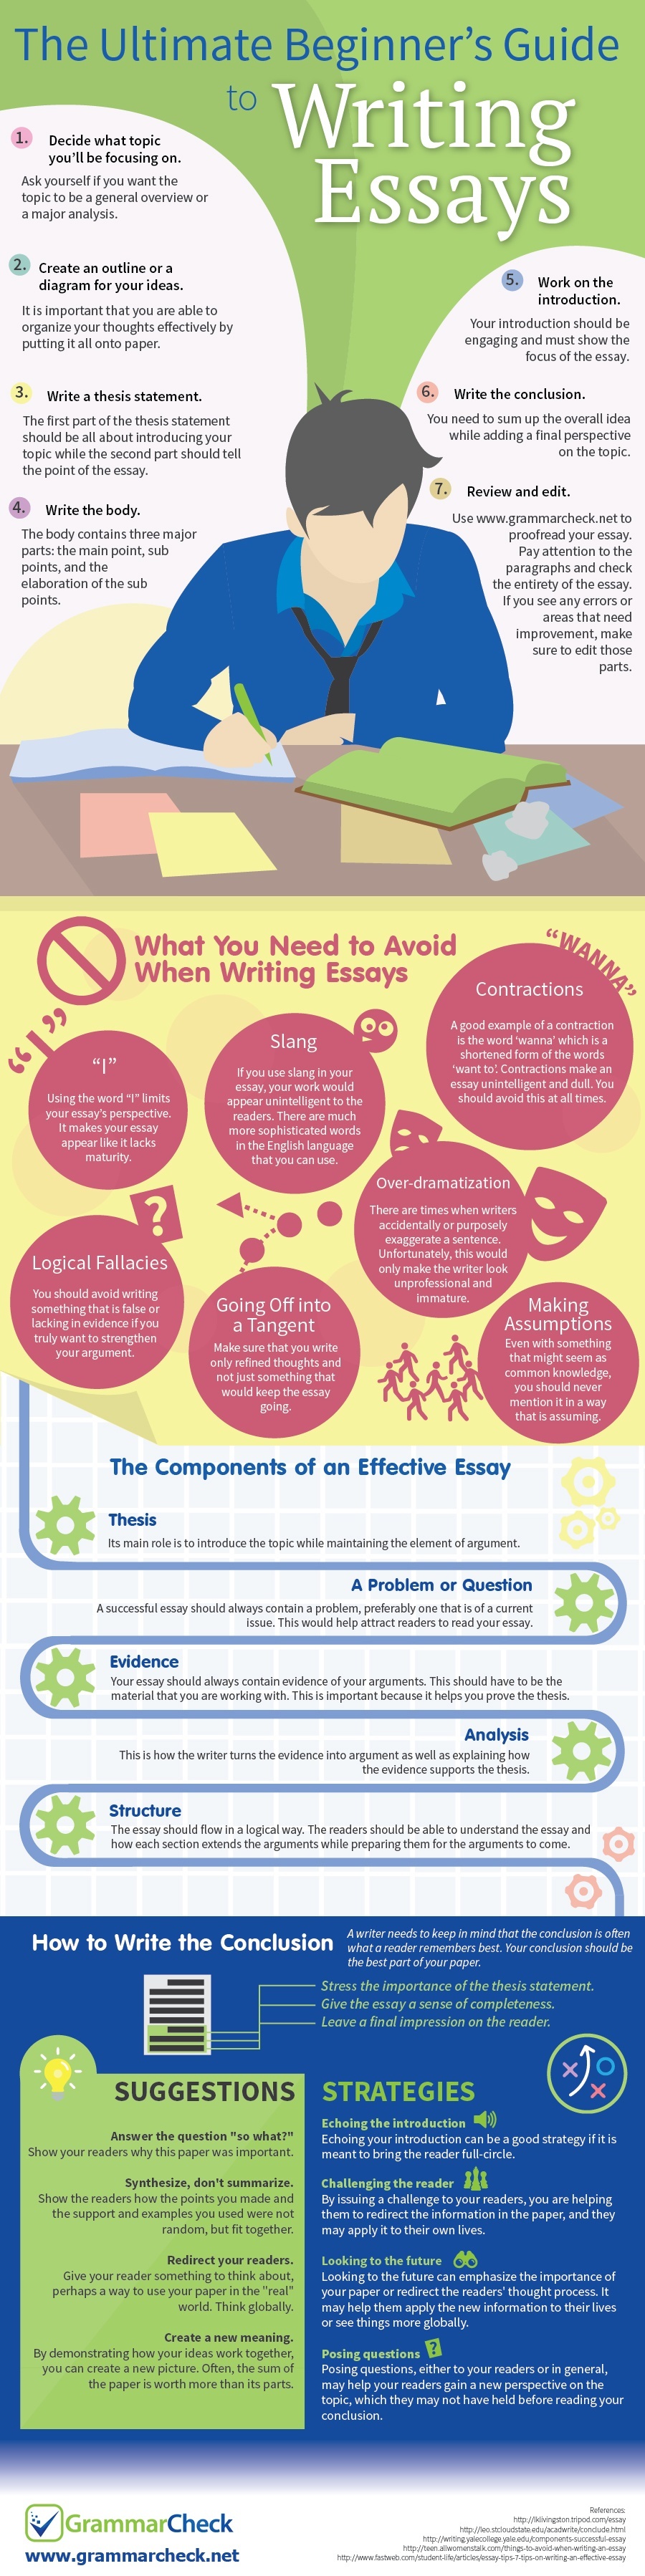 The Ultimate Beginner's Guide to Writing Essays (Infographic)